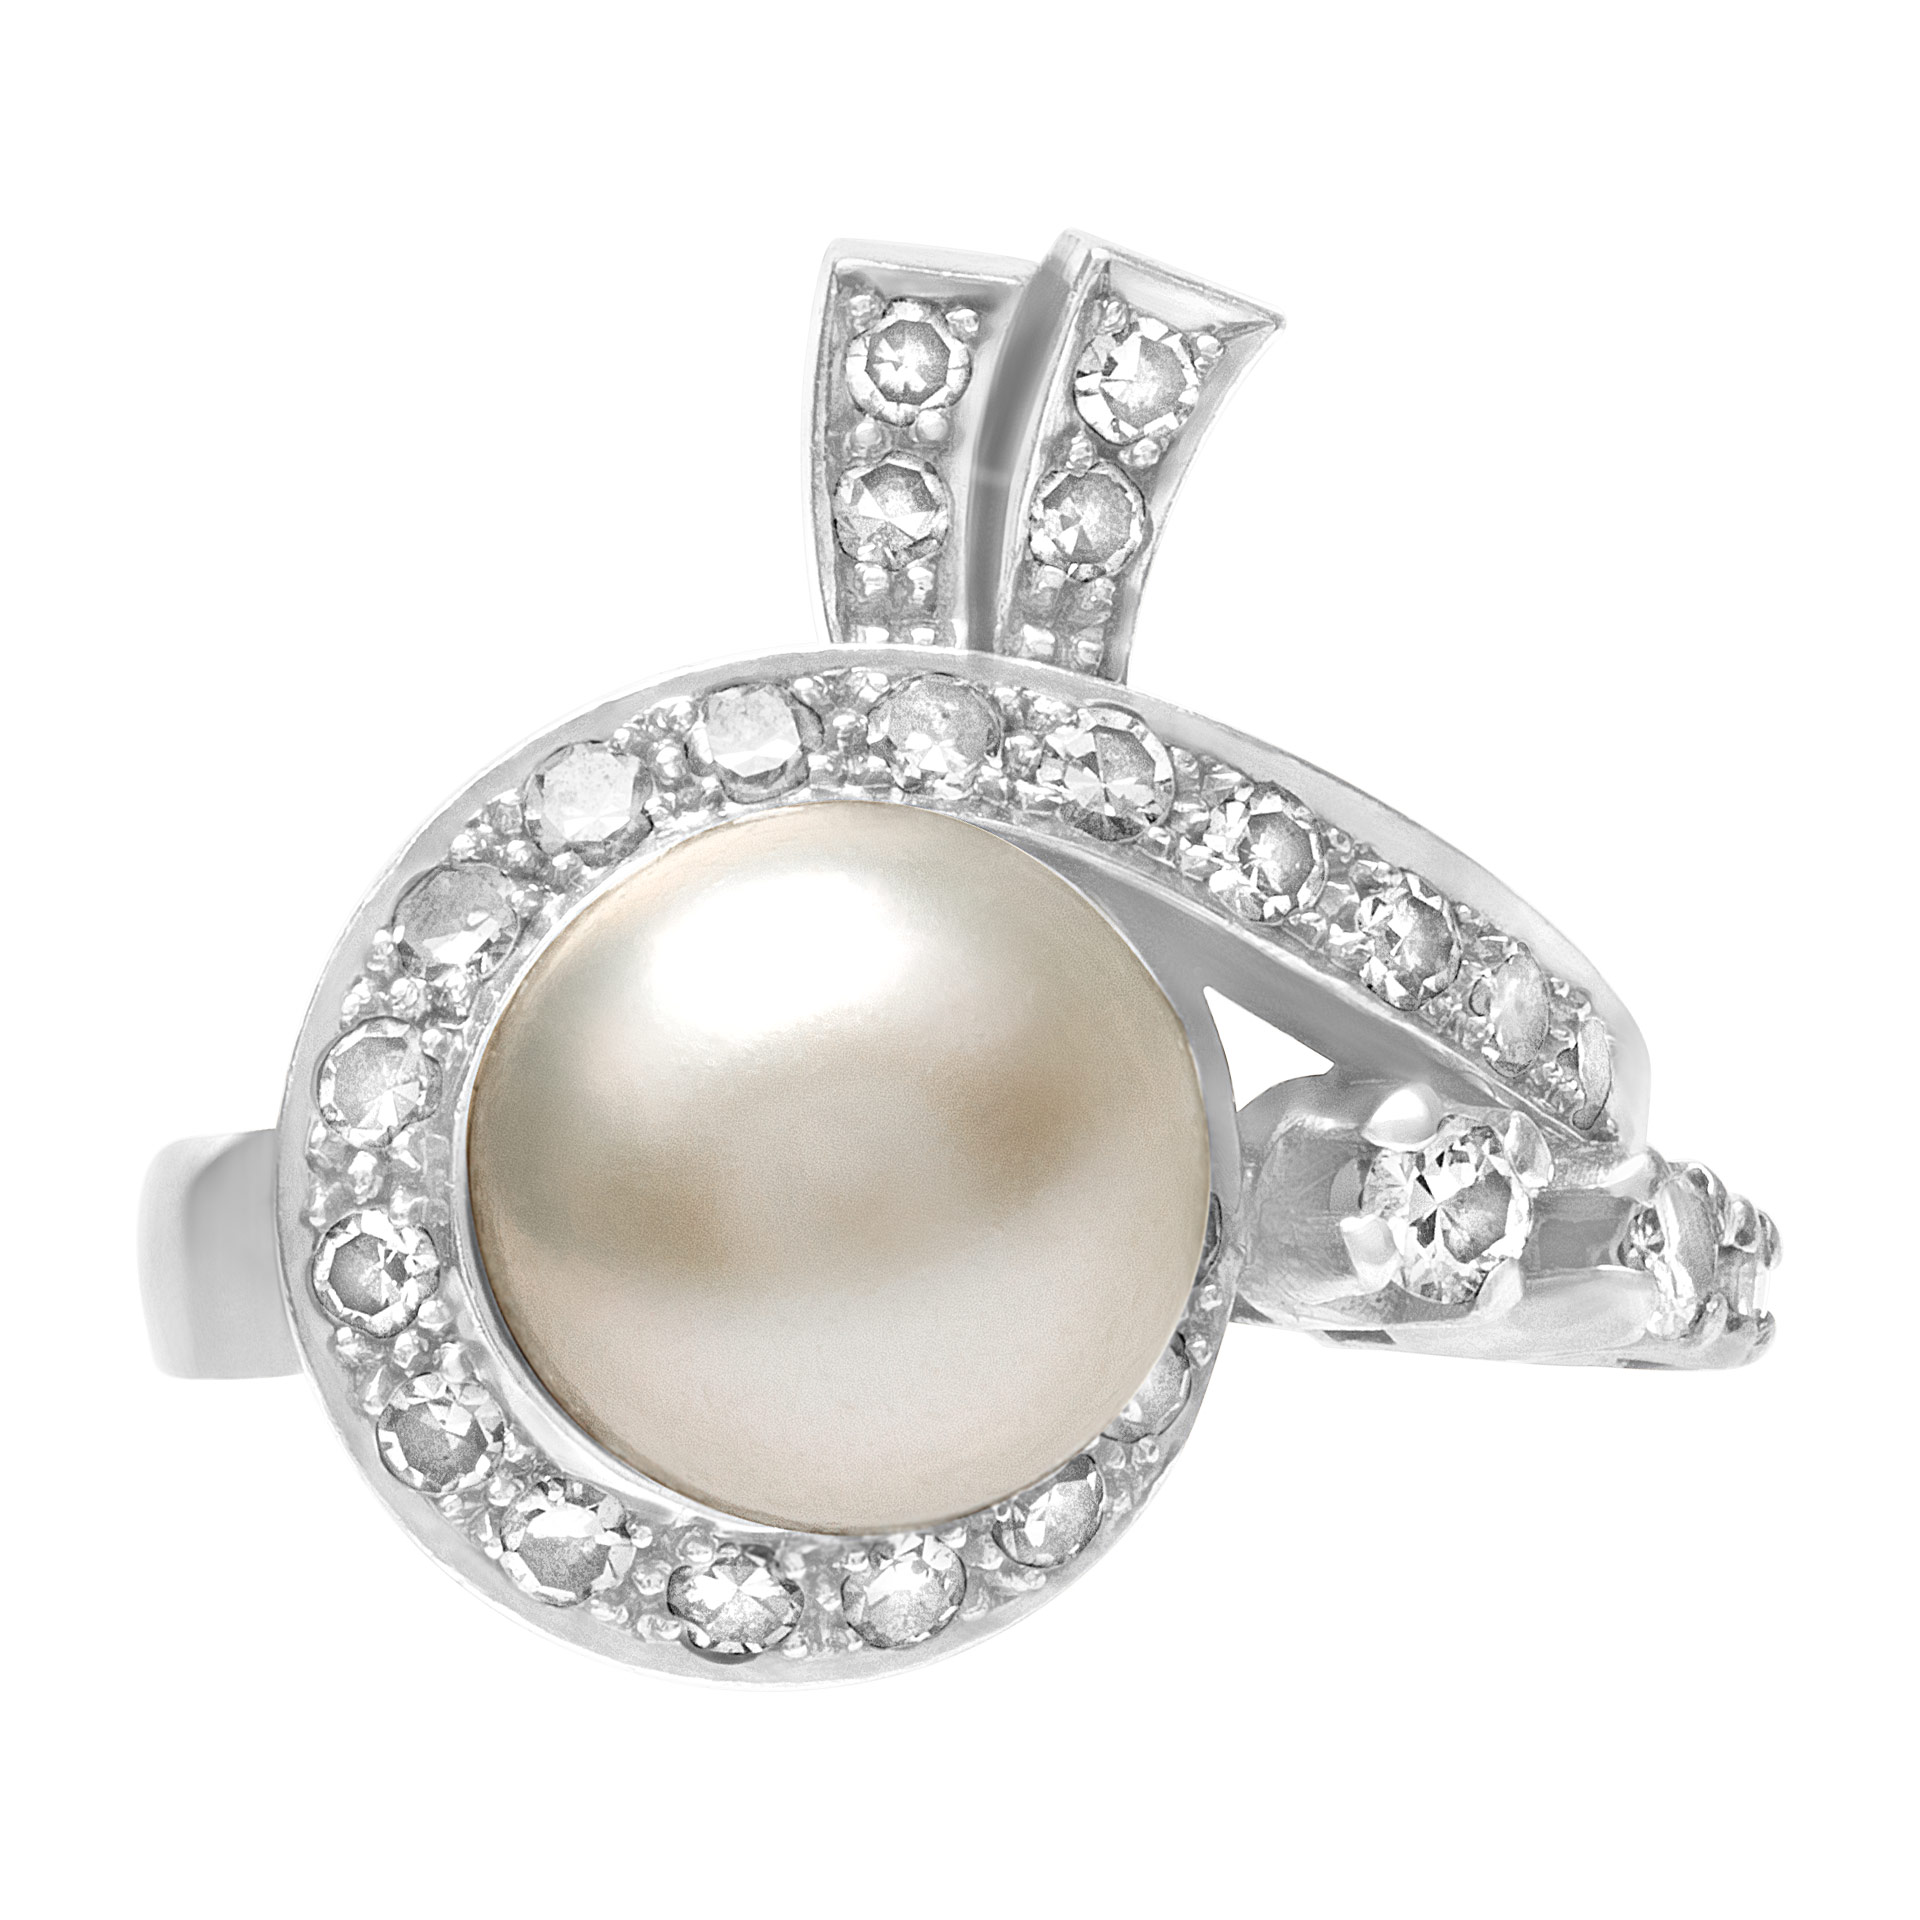 Platinum ring with center pearl and diamonds. 0.50cts in diamonds. 9.66mm pearl